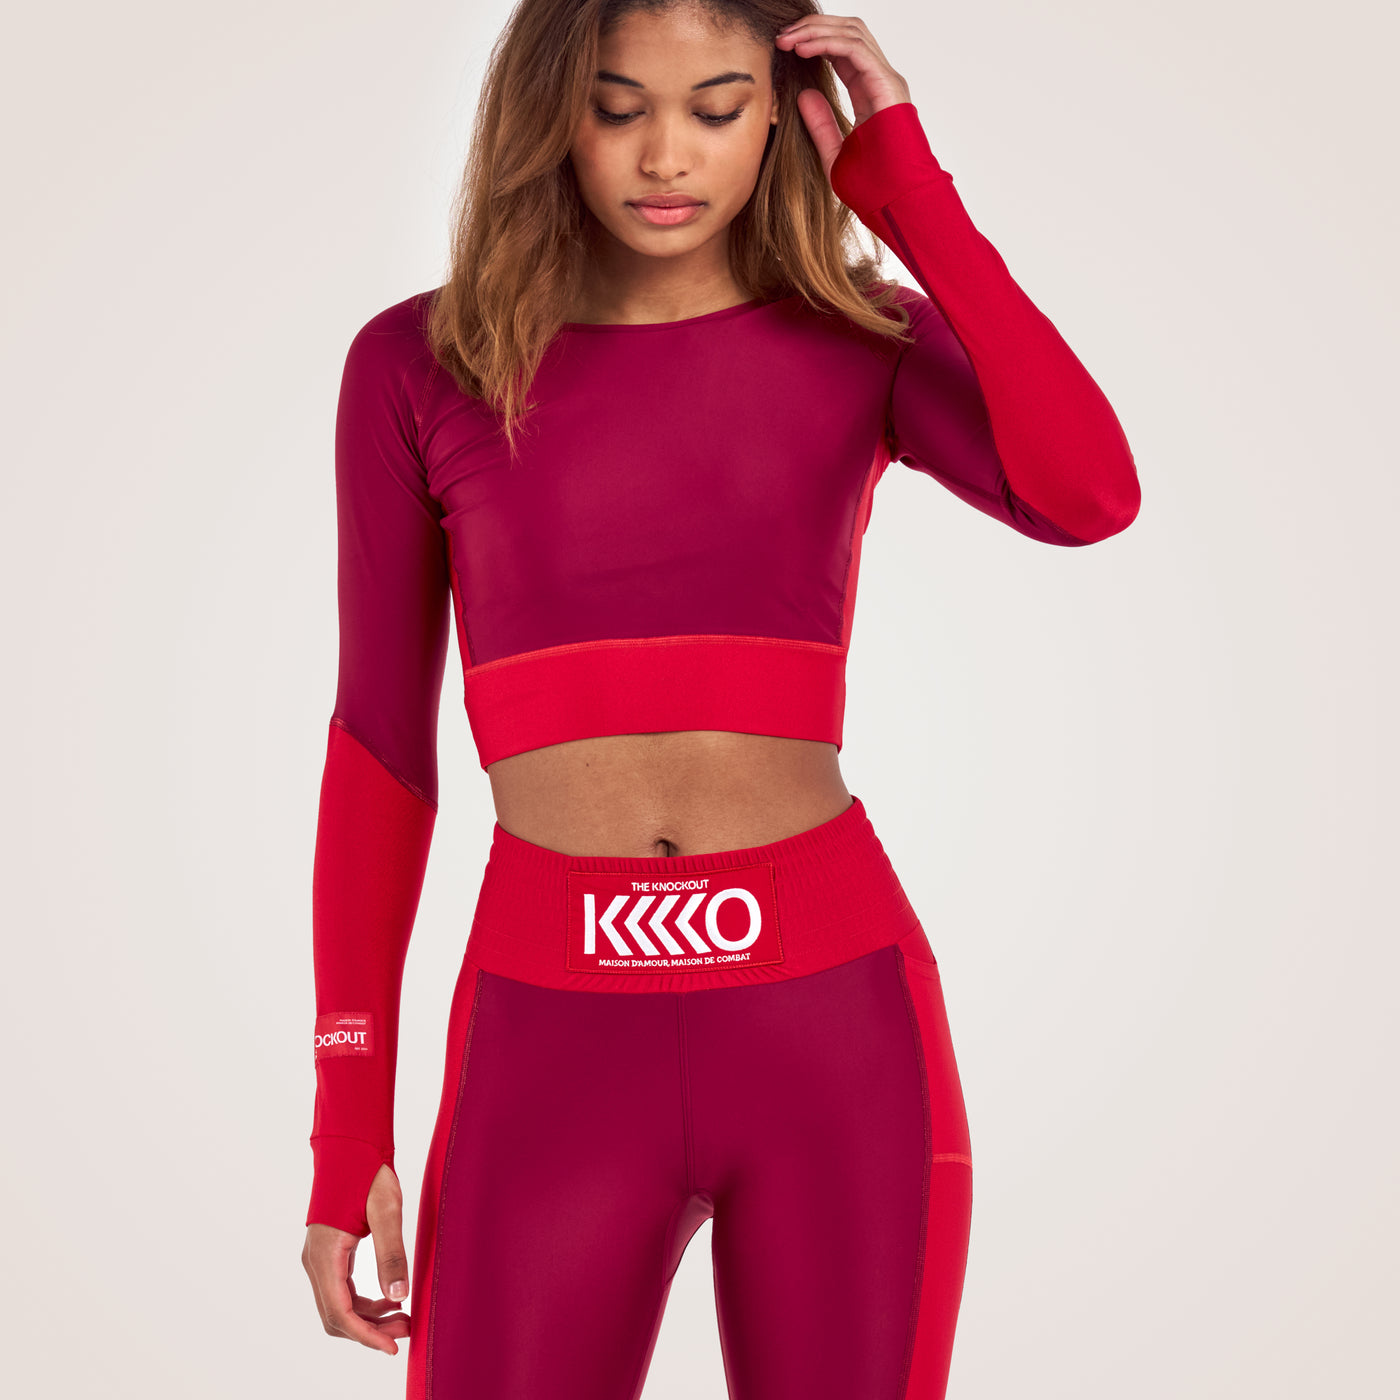 The Knockout Paris cropped long sleeved top in red